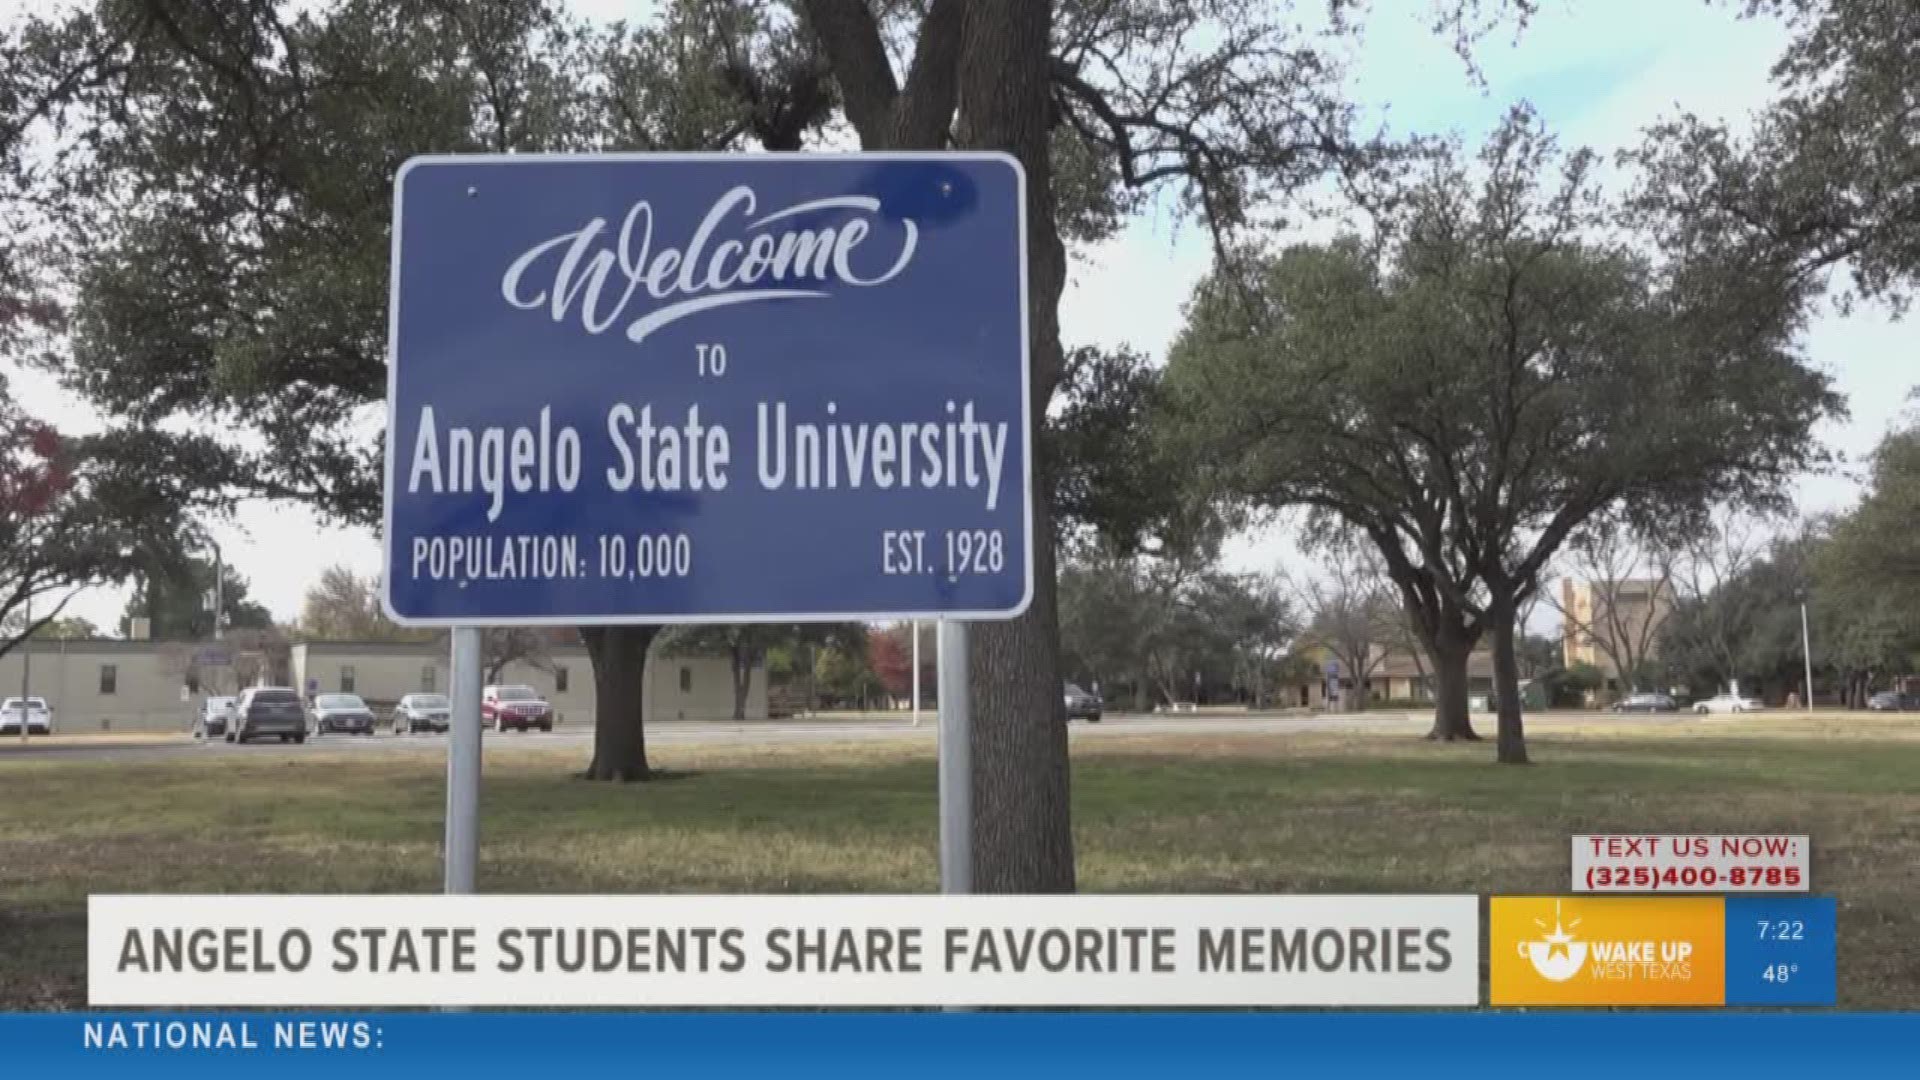 Our Malik Mingo shared what Angelo State University students said on social media about their favorite memories about the school.